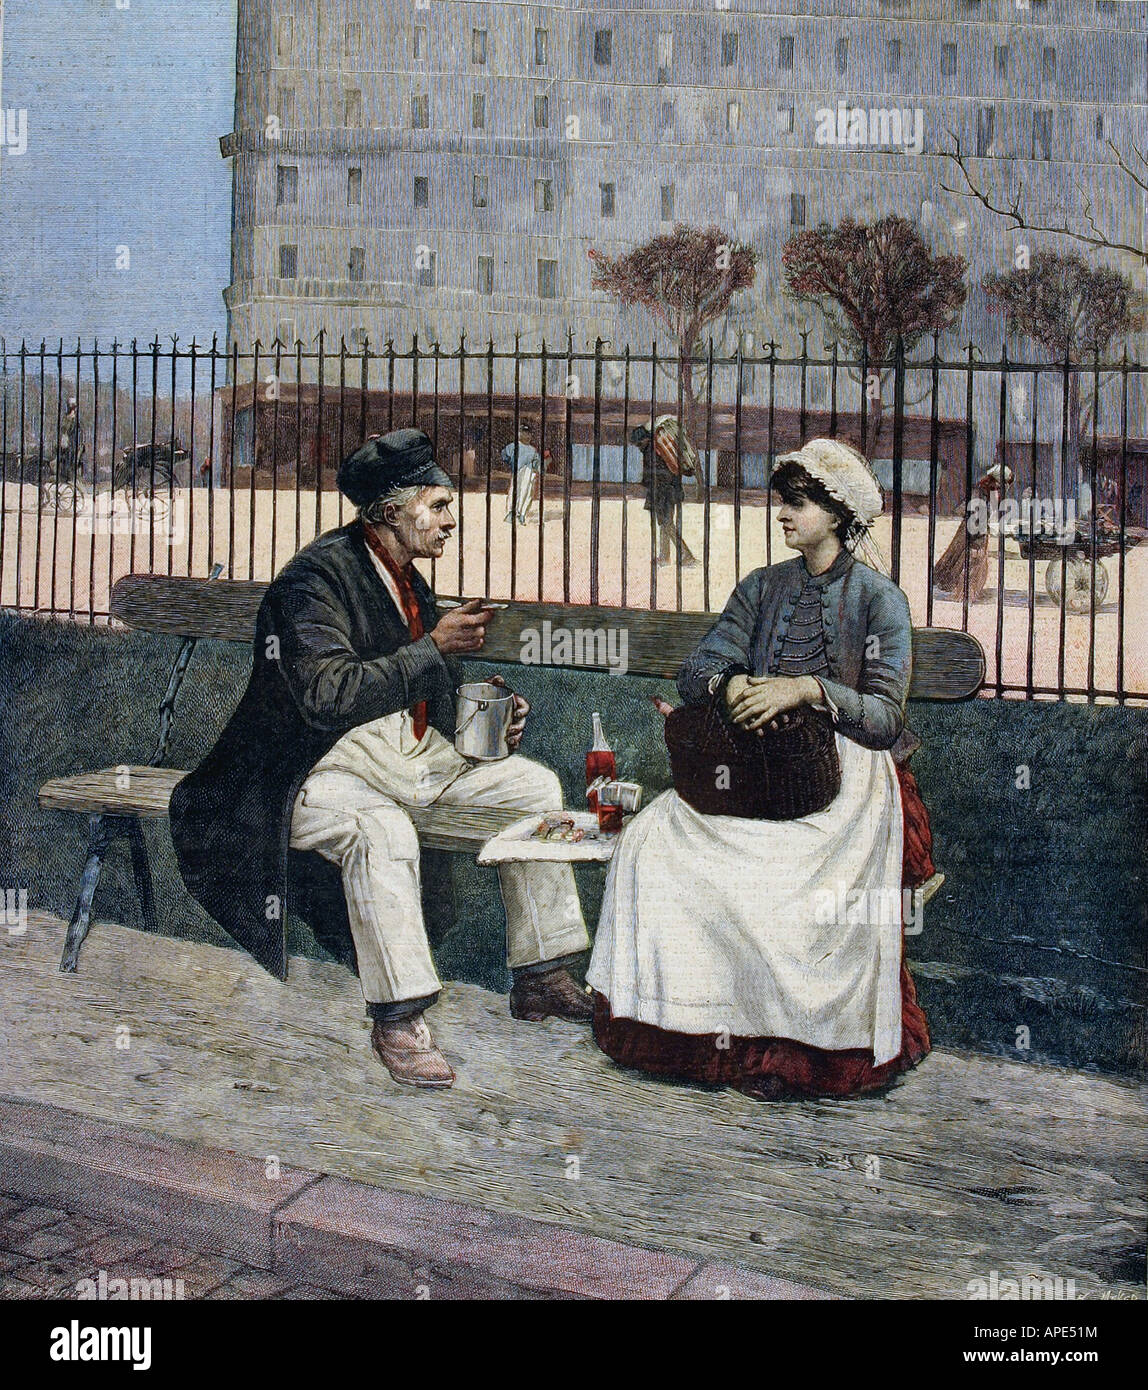 press/media, magazines, 'Le Petit Journal', Paris, 2. volume, number 21, illustrated supplement, Saturday 18 April 1891, illustration, 'The lunch of the worker', after painting by Henri Cain, , Stock Photo